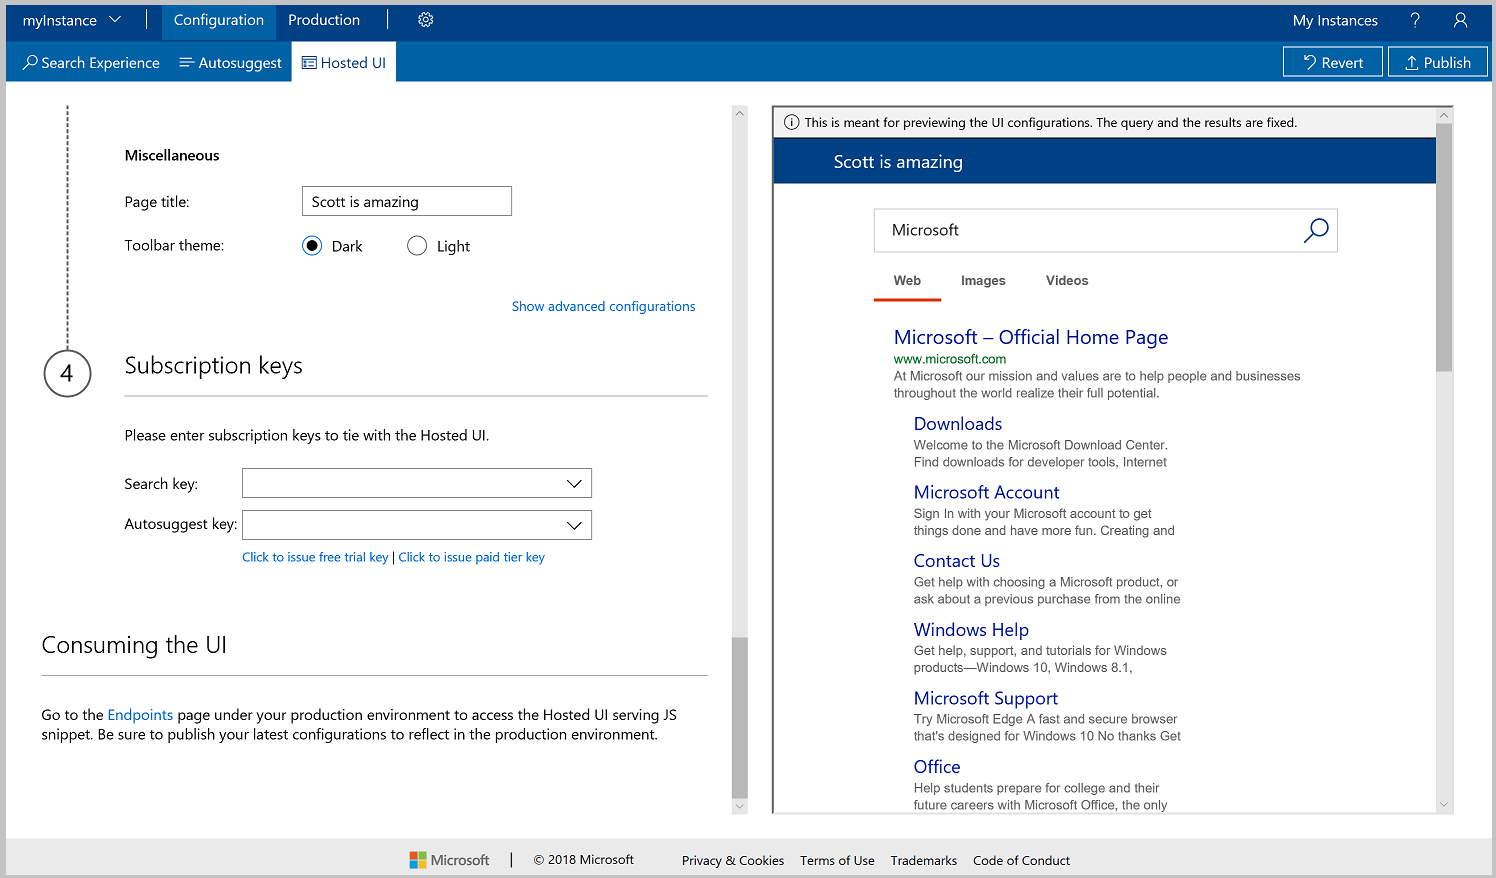 Screenshot of the Hosted UI additional configurations step